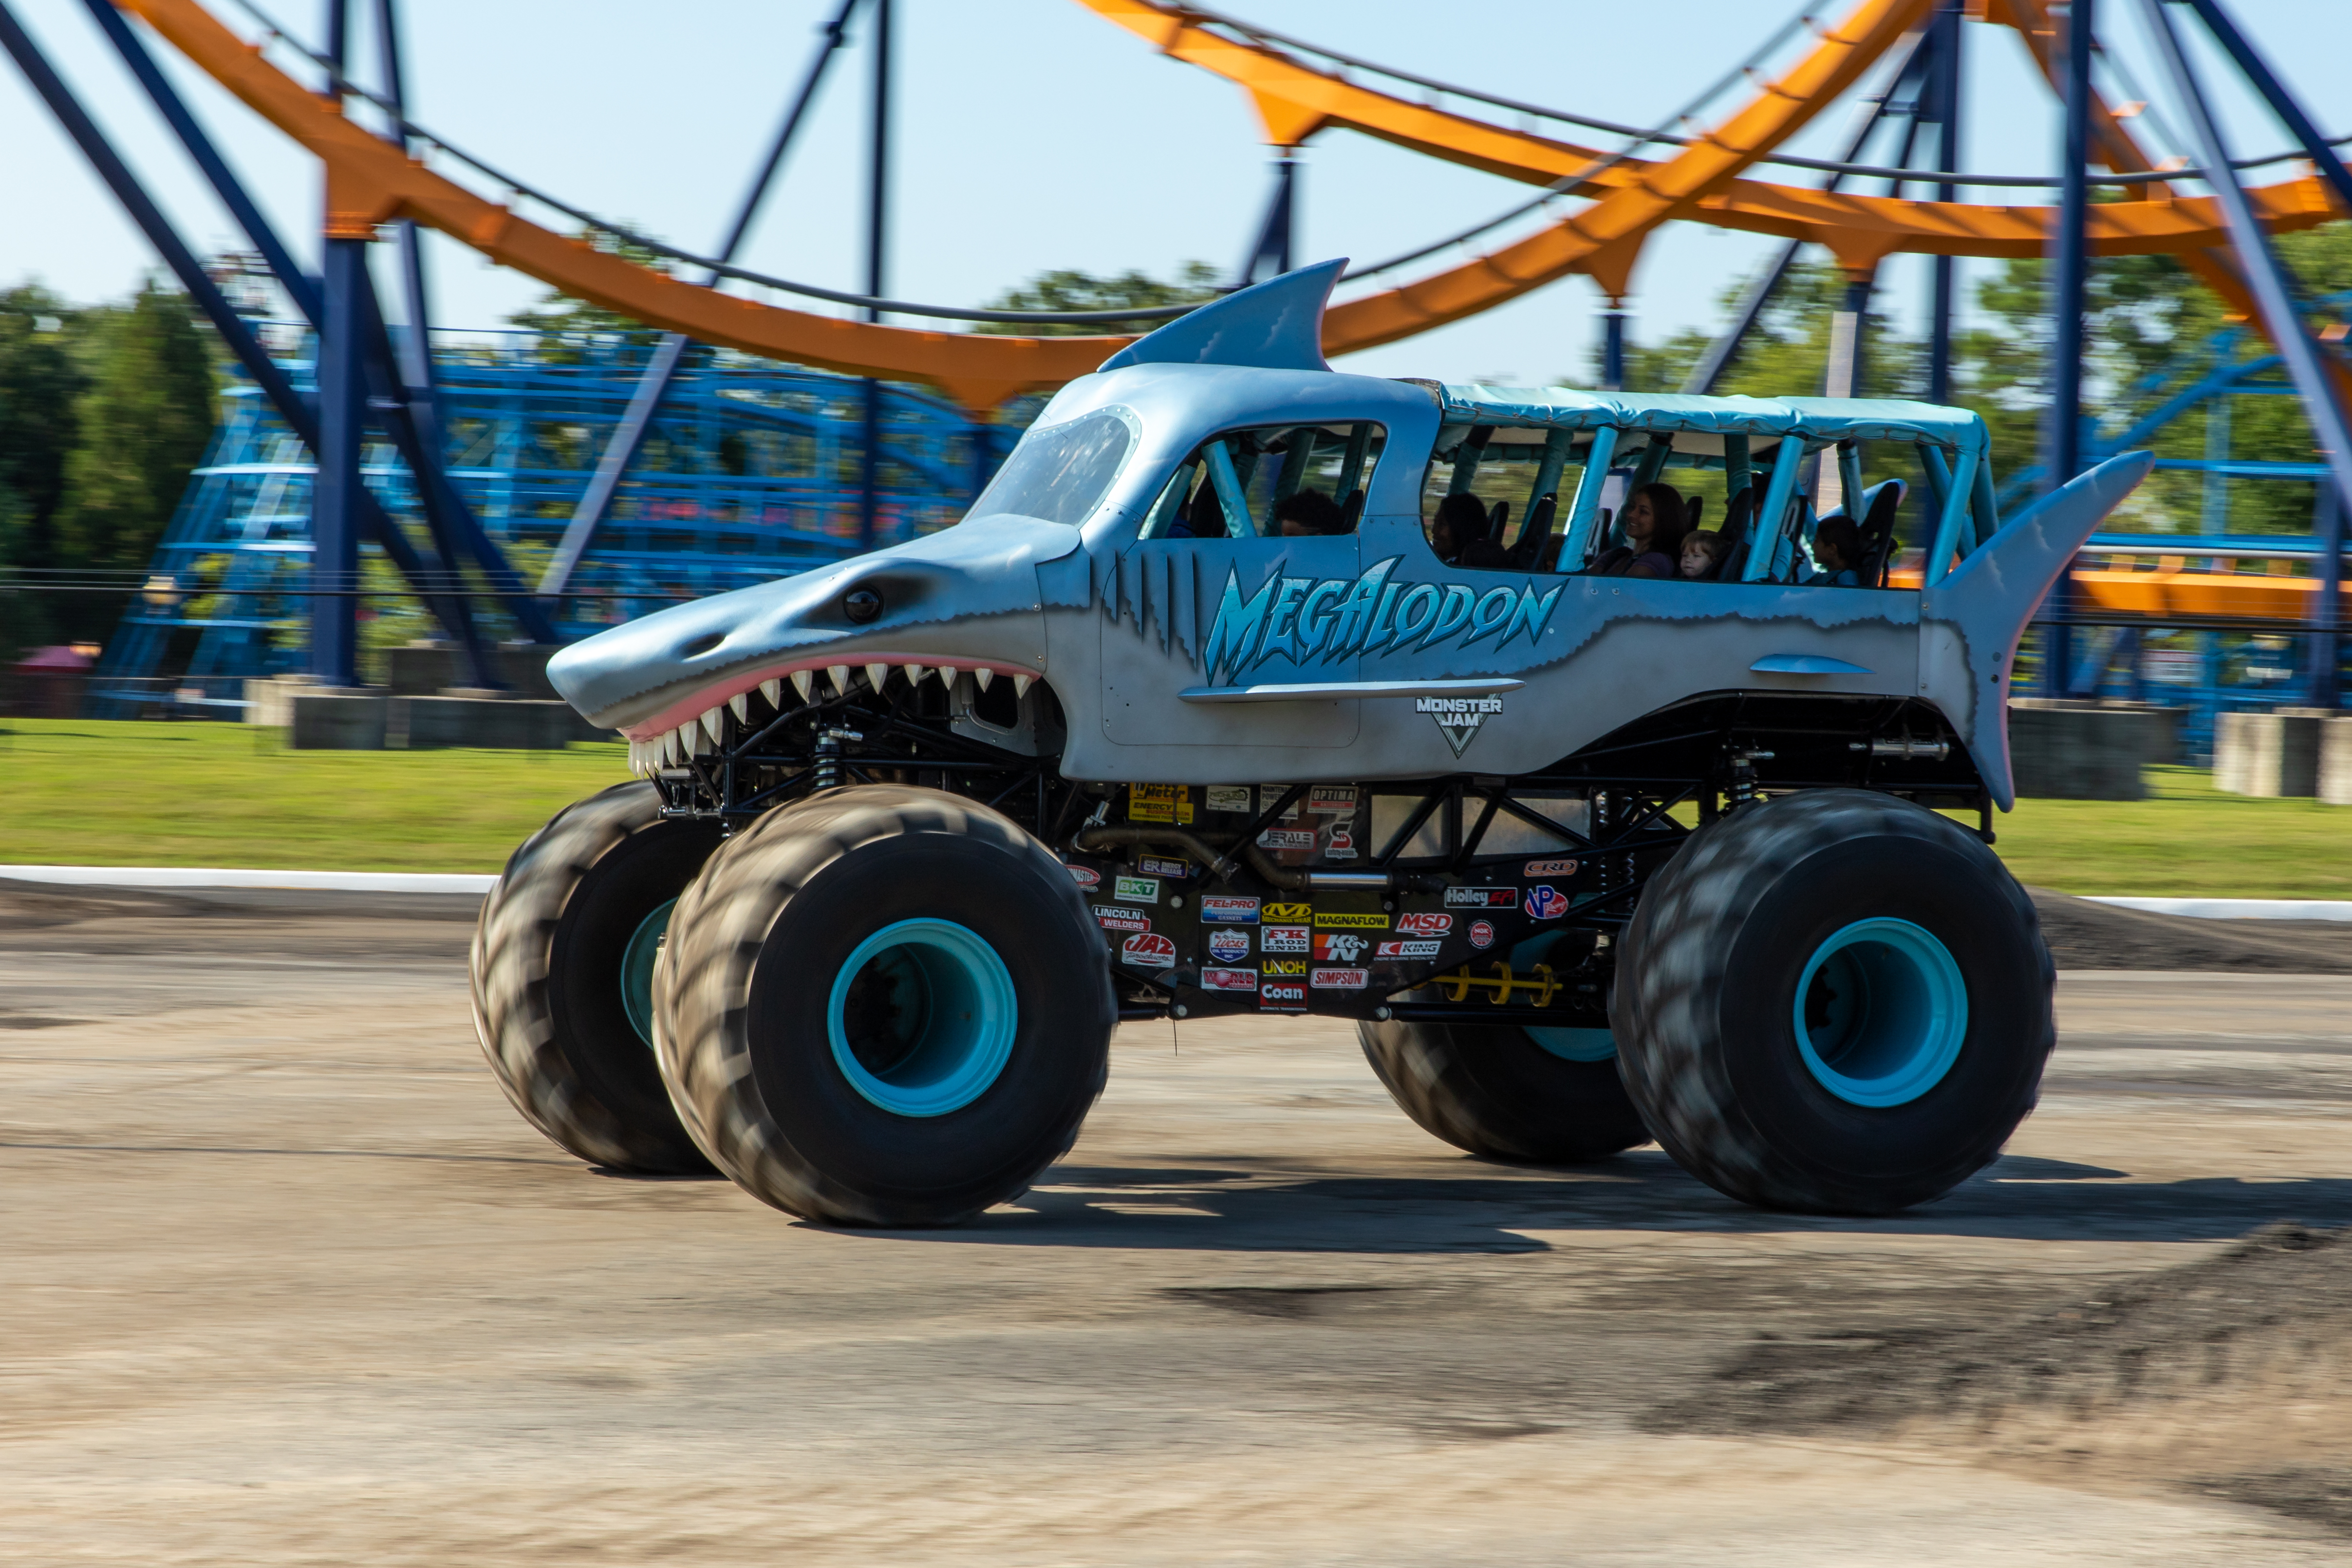 Monster Jam® trucks roll into California's Great America this summer, offering a larger-than-life experience where park guests can get nose-to-grille, sit inside and even take an adrenaline-charged ride in a Monster Jam truck. Monster Jam® Thunder Alley™ takes place June 20-July 12.